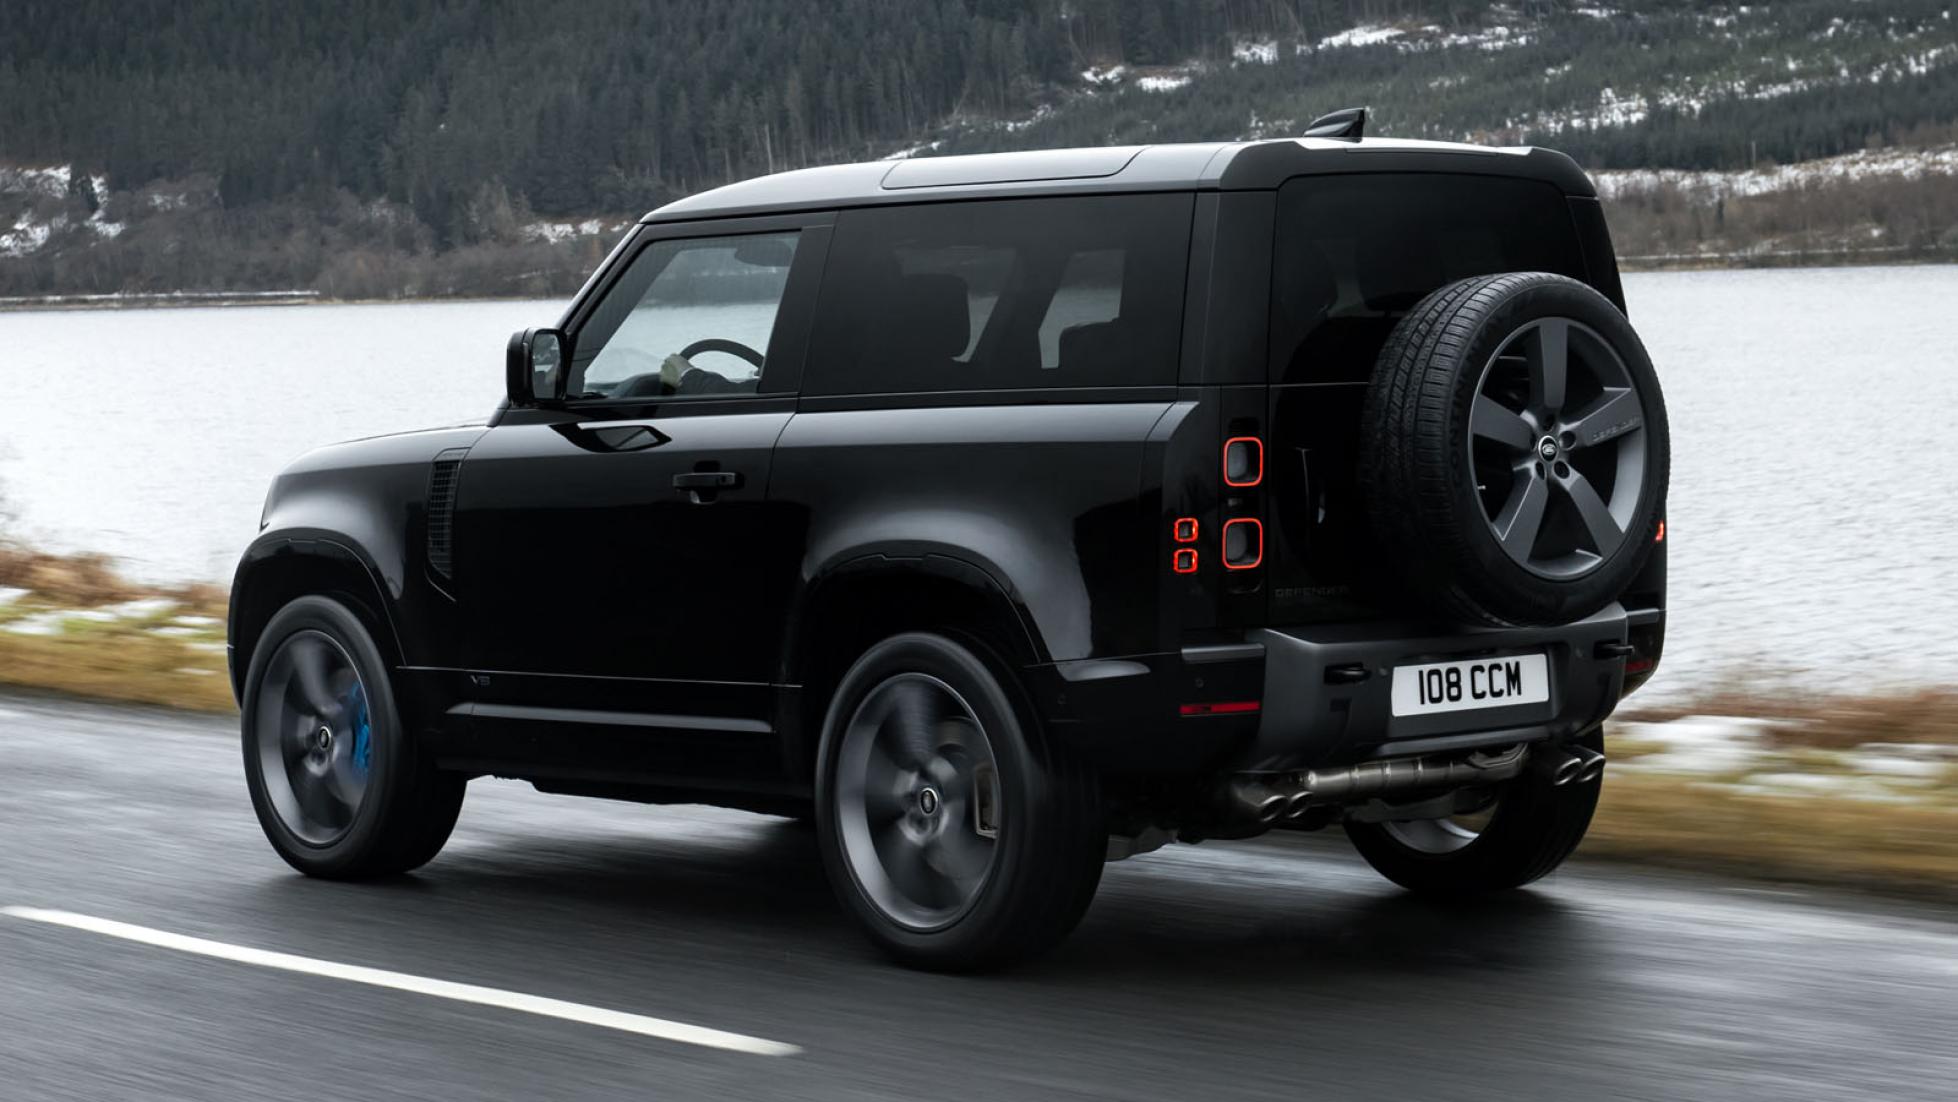 2022 Land Rover Defender V8 in 90 or 110 body-styles | Top ...